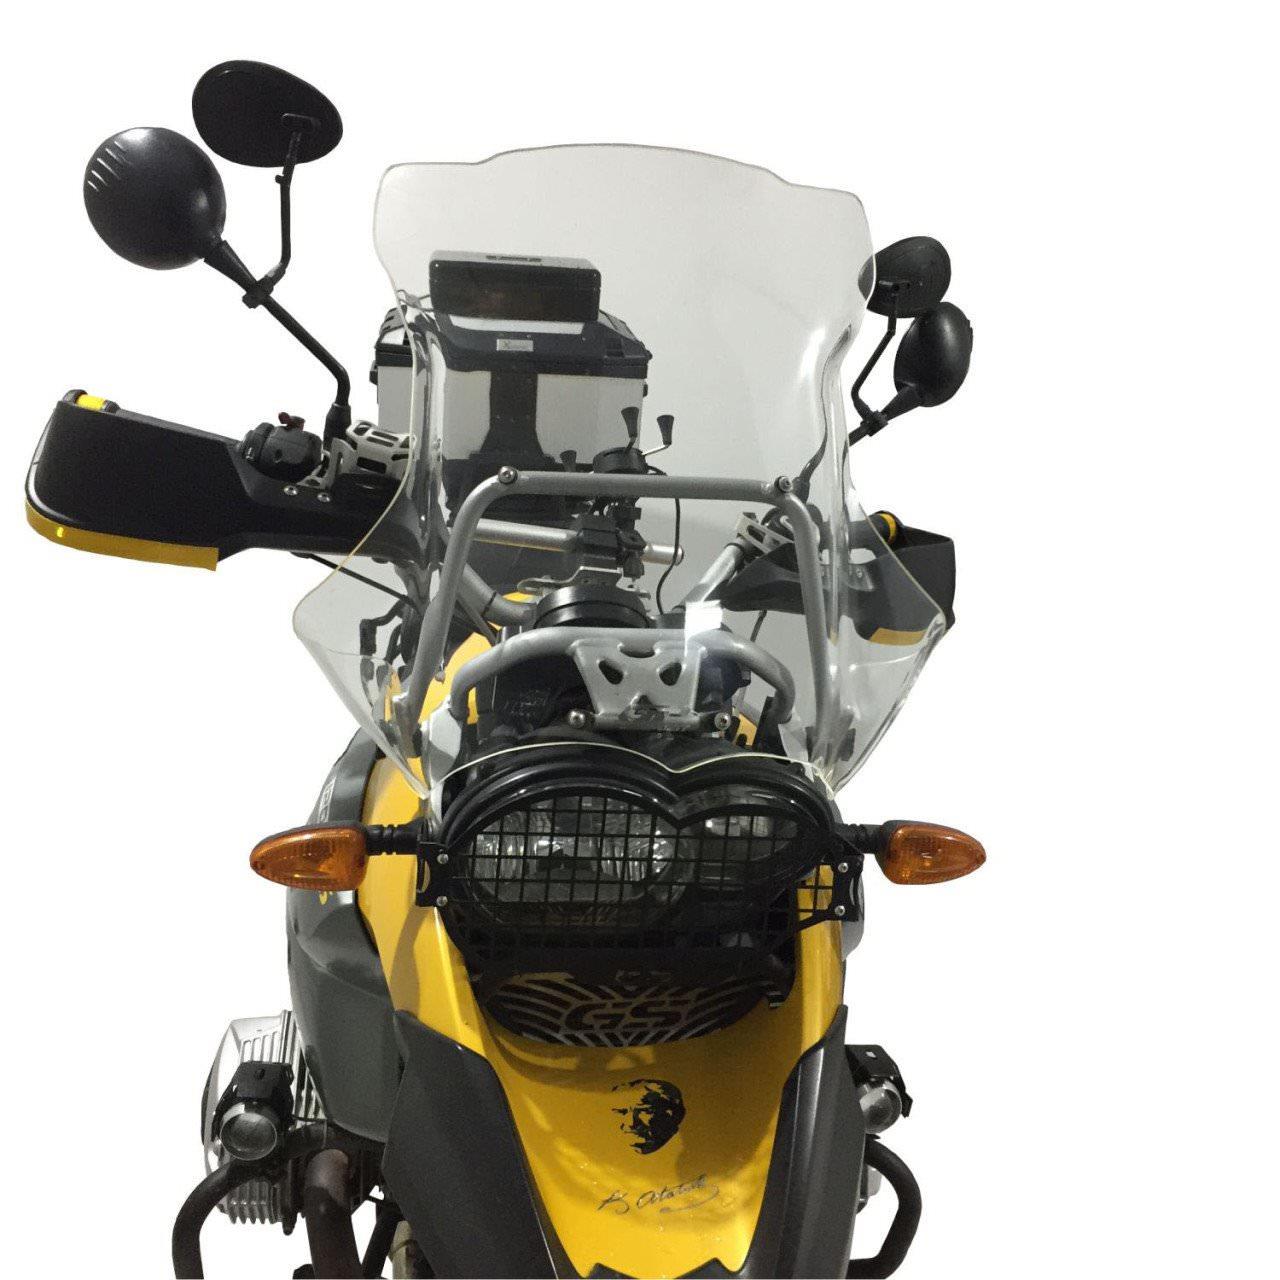 BMW R1200GS R1200GS ADV clear windscreen withstand holes 04-12